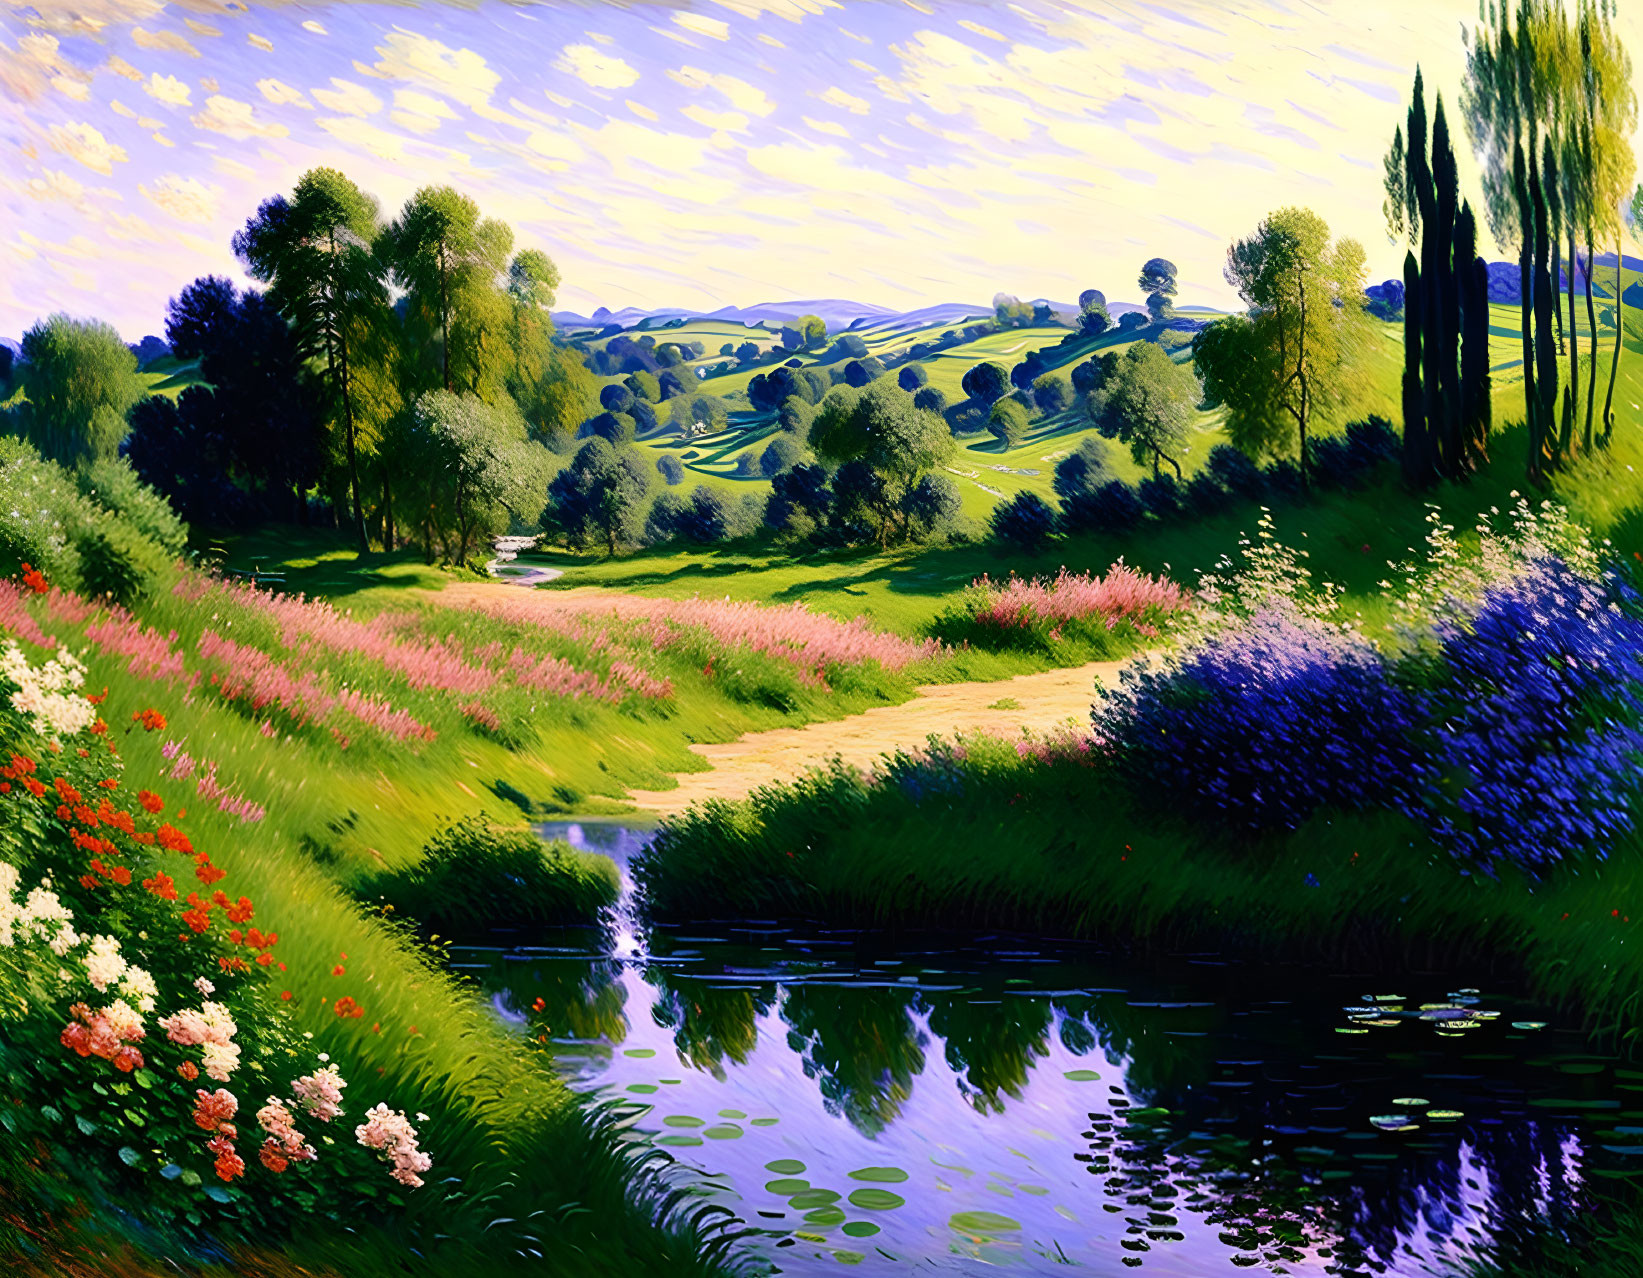 Colorful landscape with green hills, wildflowers, and a reflective river